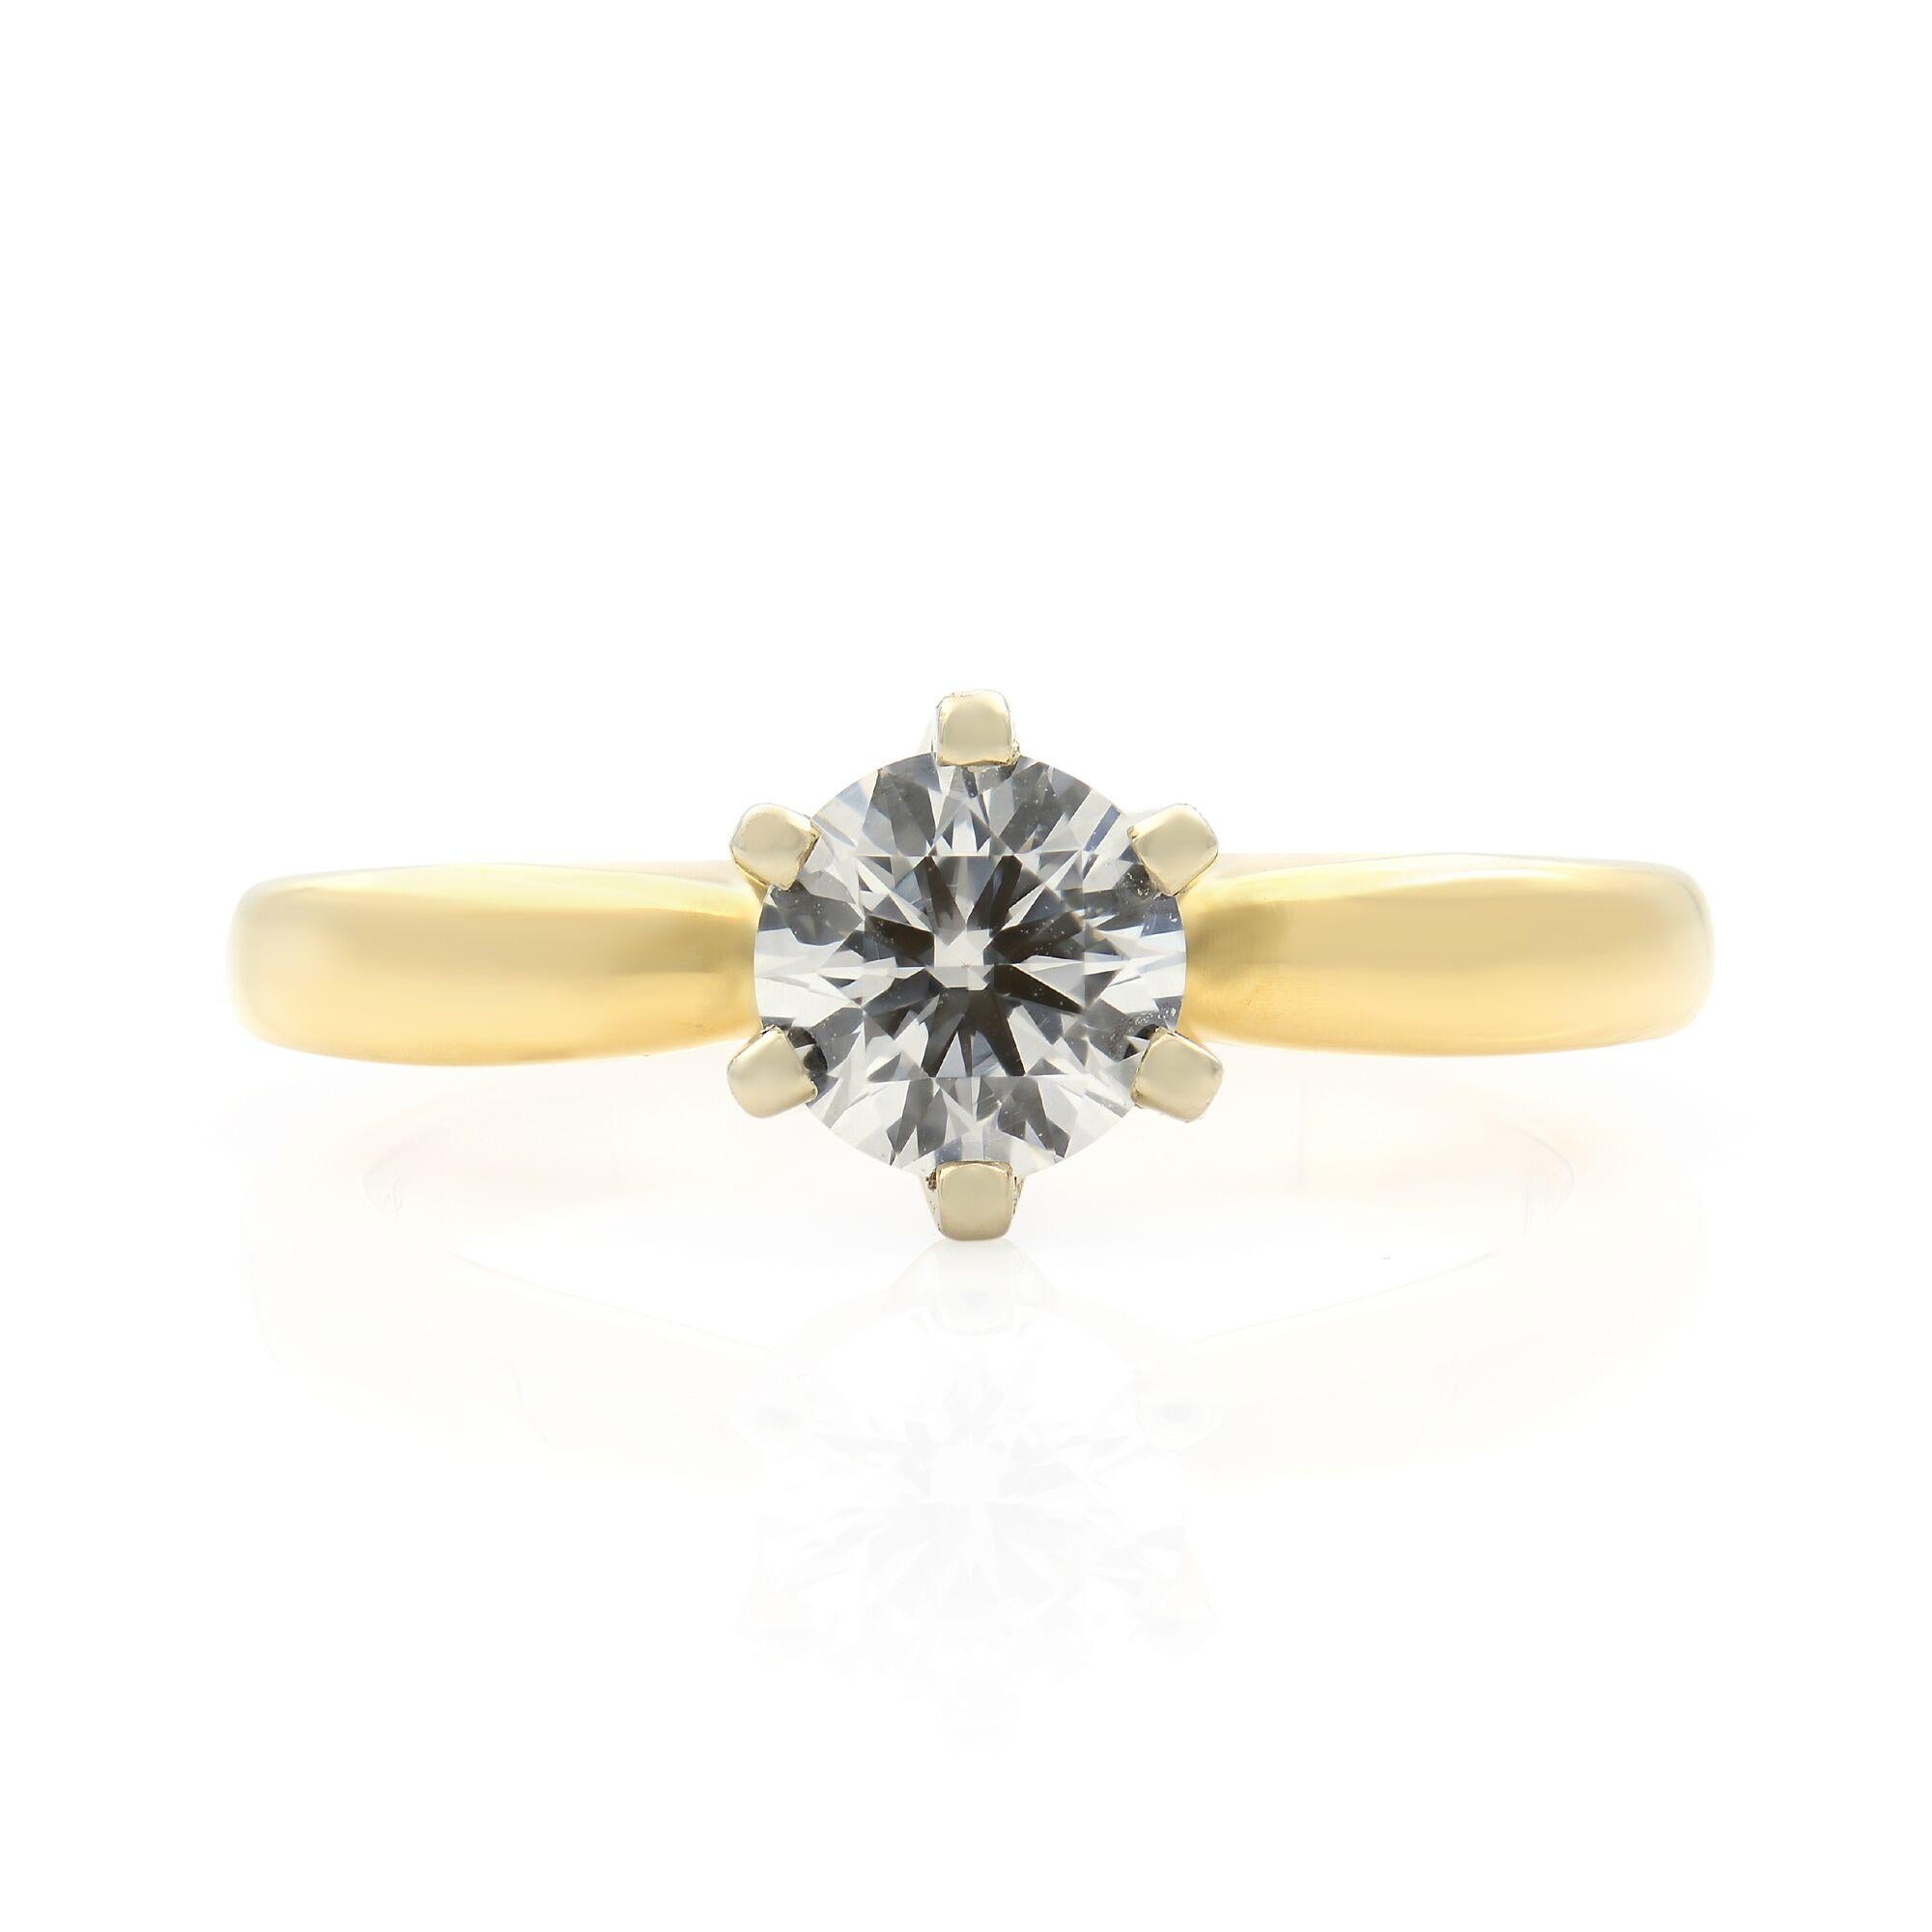 This classic solitaire engagement ring is crafted in 14K yellow gold and features a prong set round brilliant cut diamond weighing 0.70cts. Diamond quality: color F and clarity VS2. The high polished finish of this solitaire ring exemplifies the